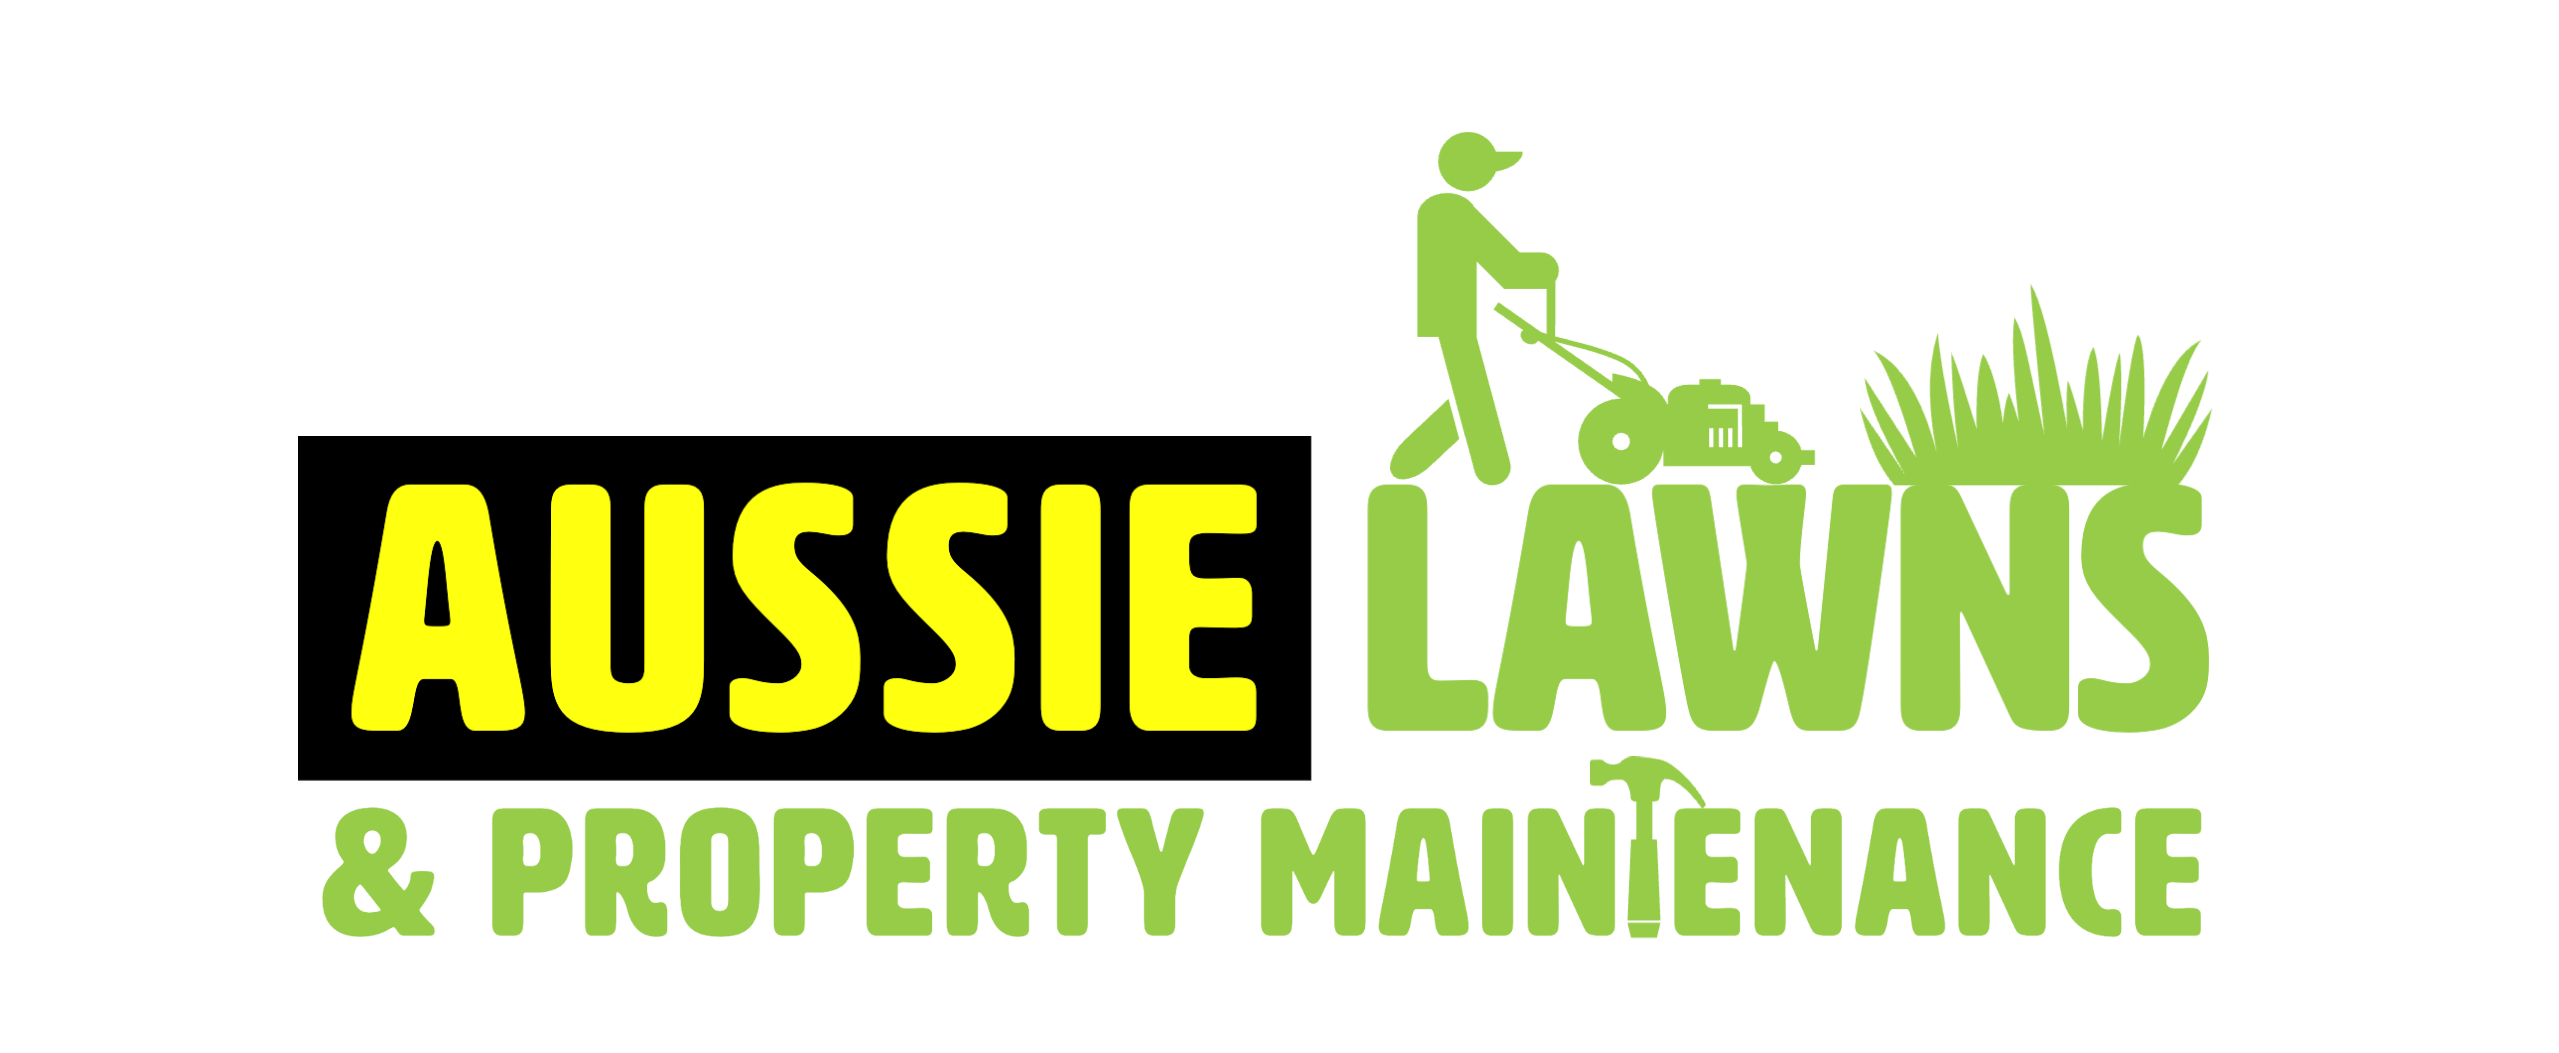 Aussie lawns and property maintenance